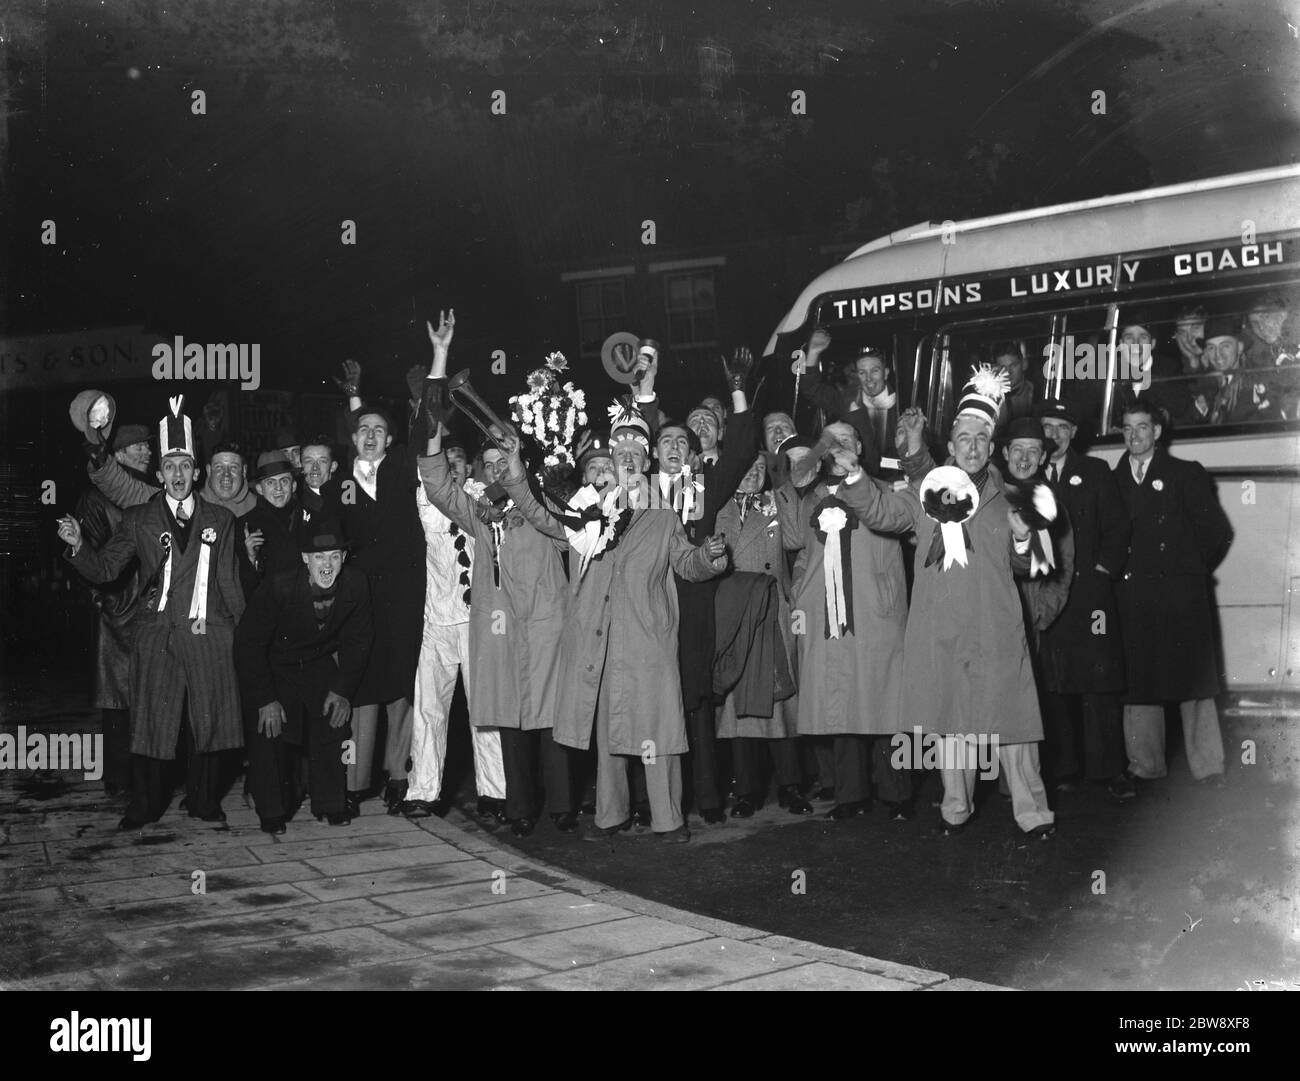 Dartford supporters - FA Cup - Dartford's supporters leave at midnight to travel to Shildon for their FA Cup tie - 12/12/36 Charabanc party climbing aboard their Timpson luxary coach to go and support Dartford football club . 1936 Stock Photo